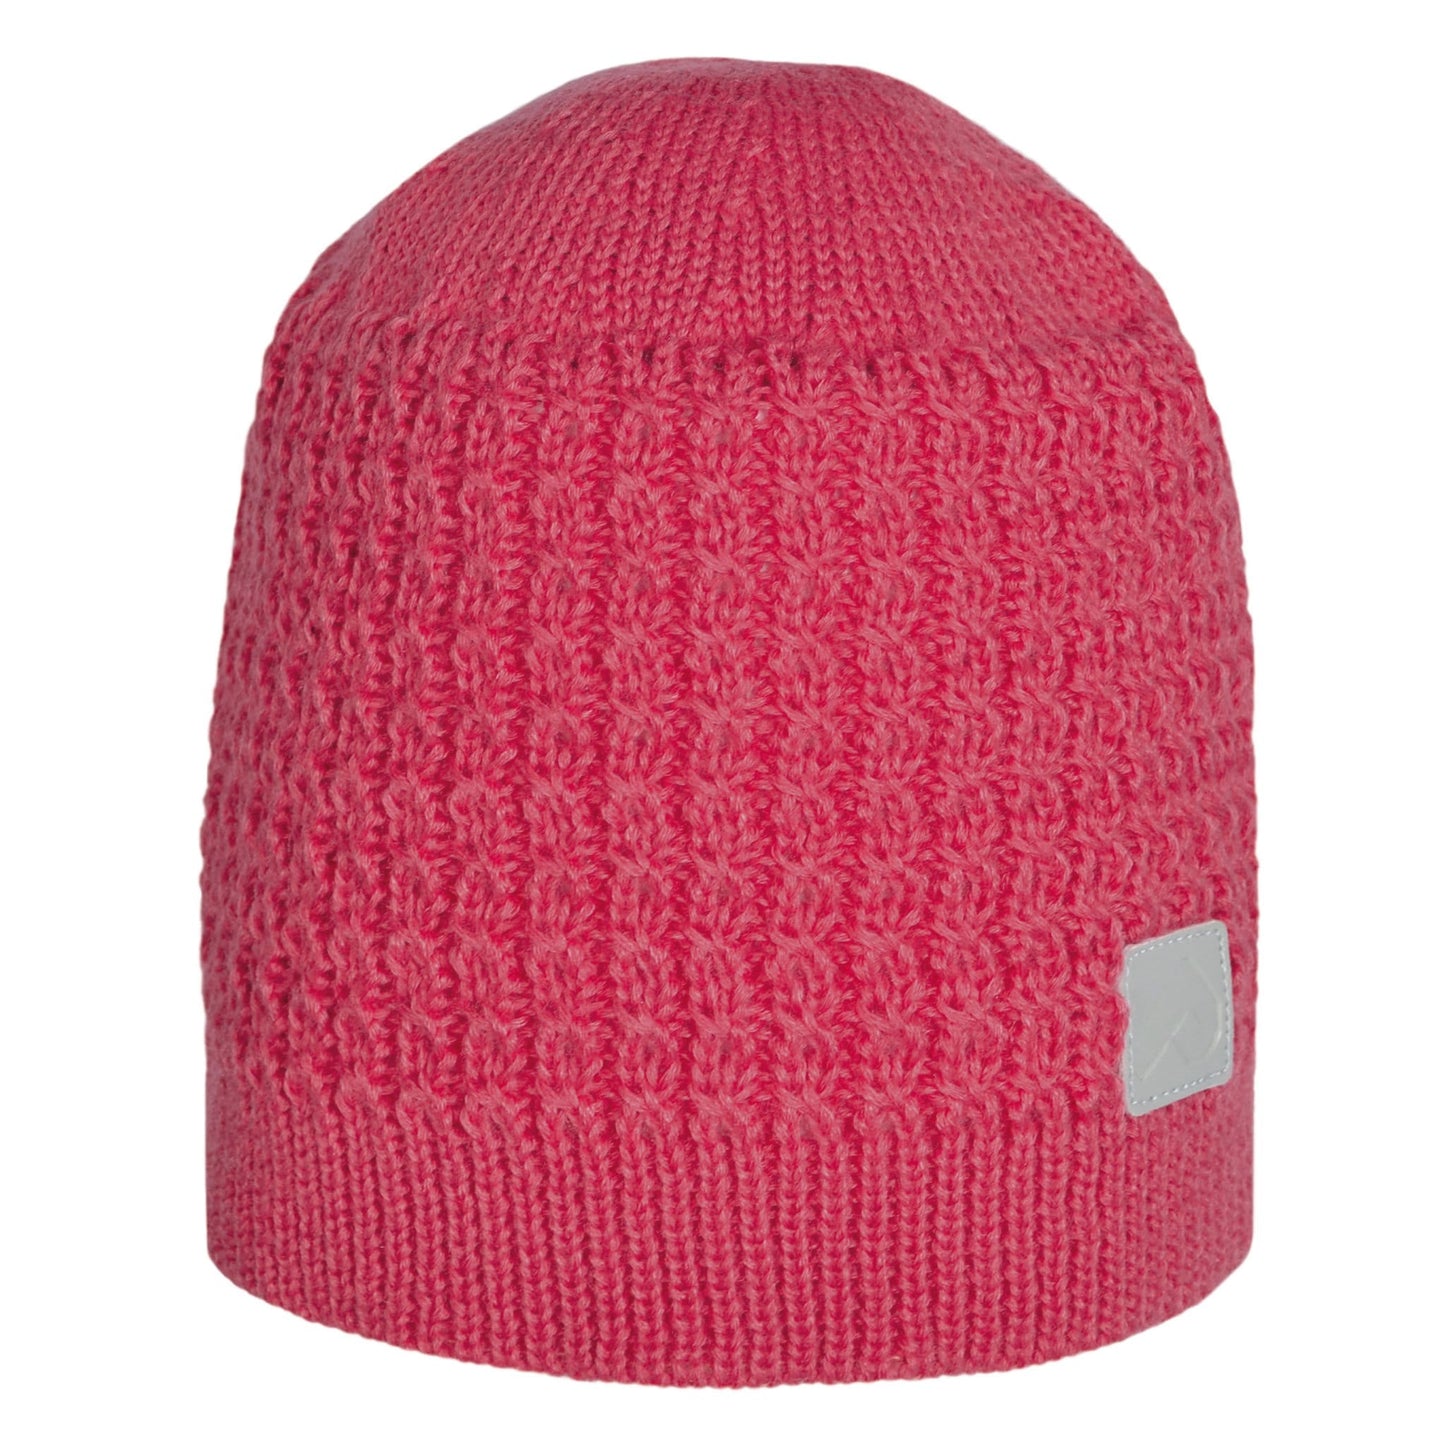 Knitted acrylic hat - Pink